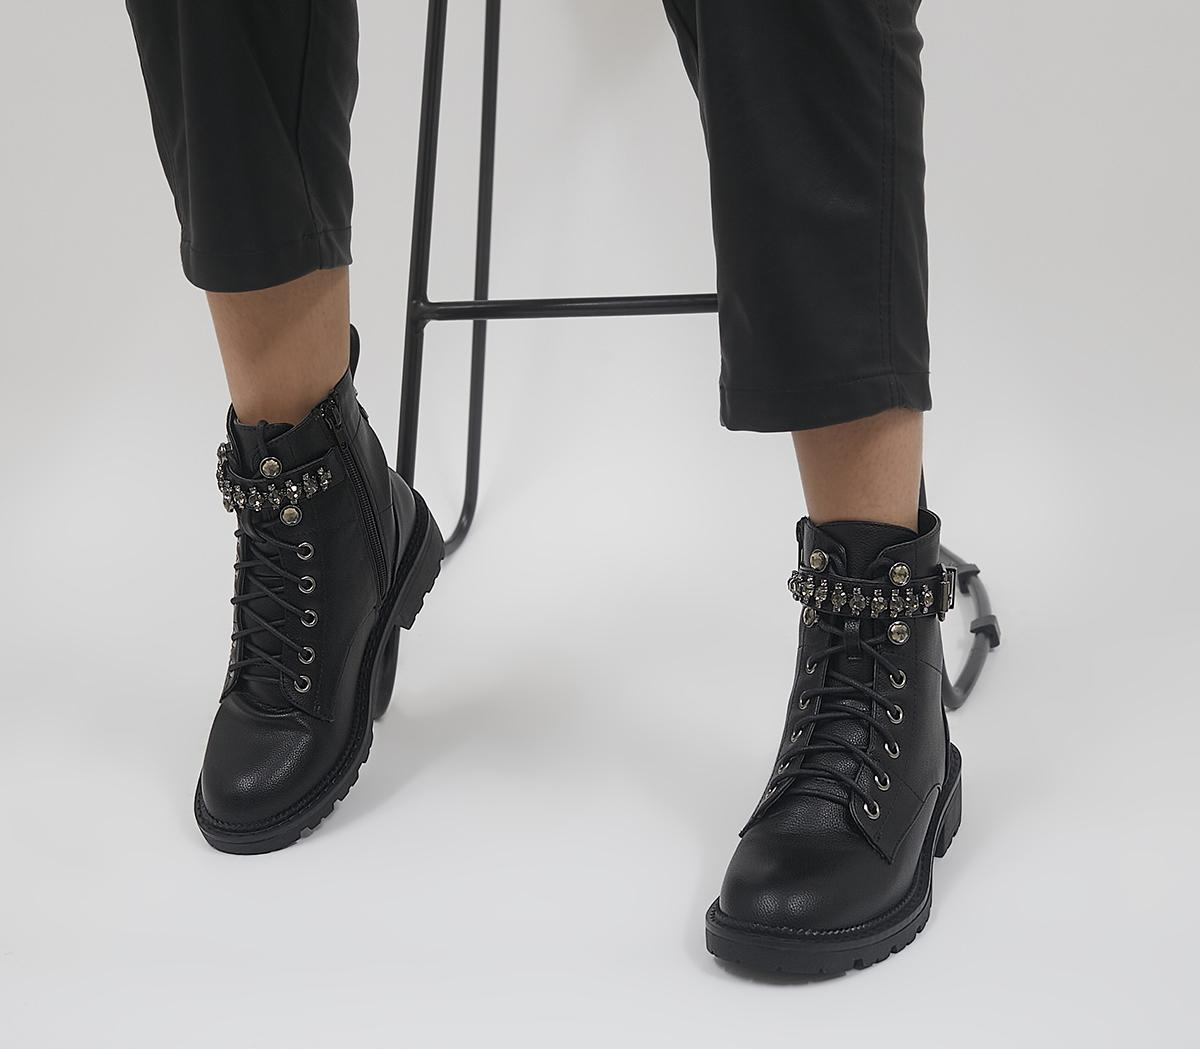 OFFICE Astonish Embellished Lace Up Ankle Boots Black - Women's Ankle Boots